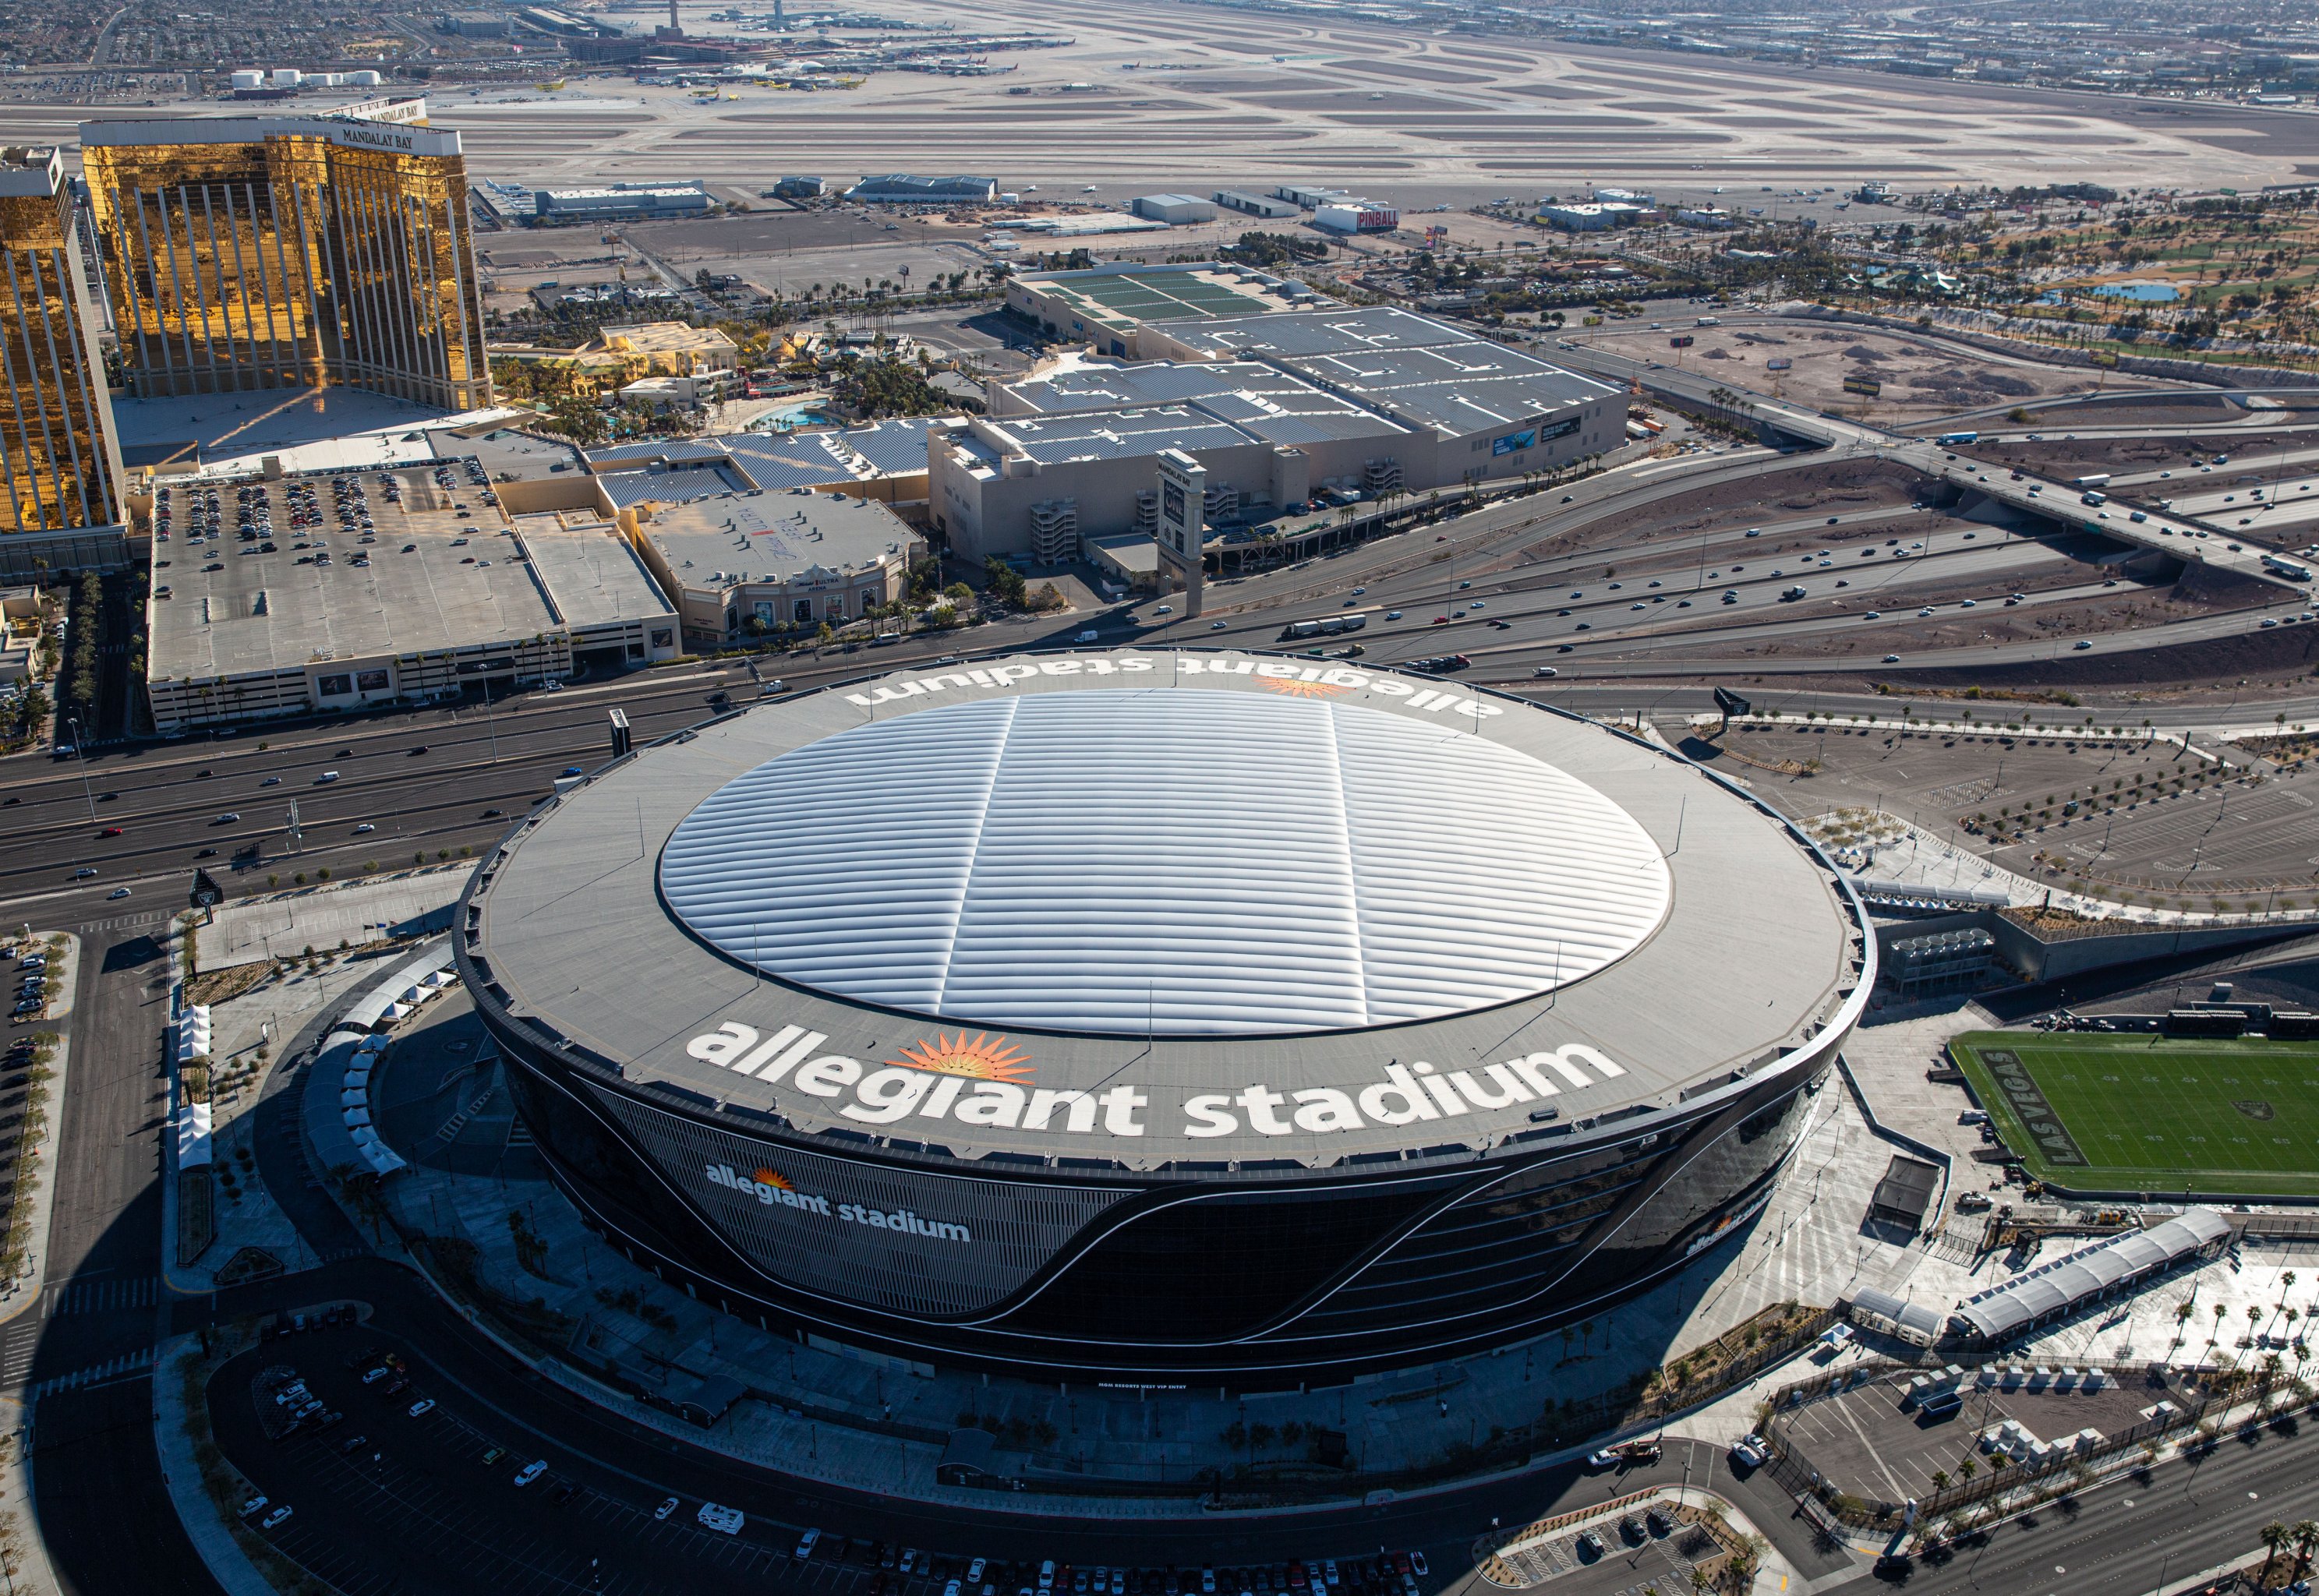 Allegiant Stadium is the second most expensive stadiums in the world in 2022